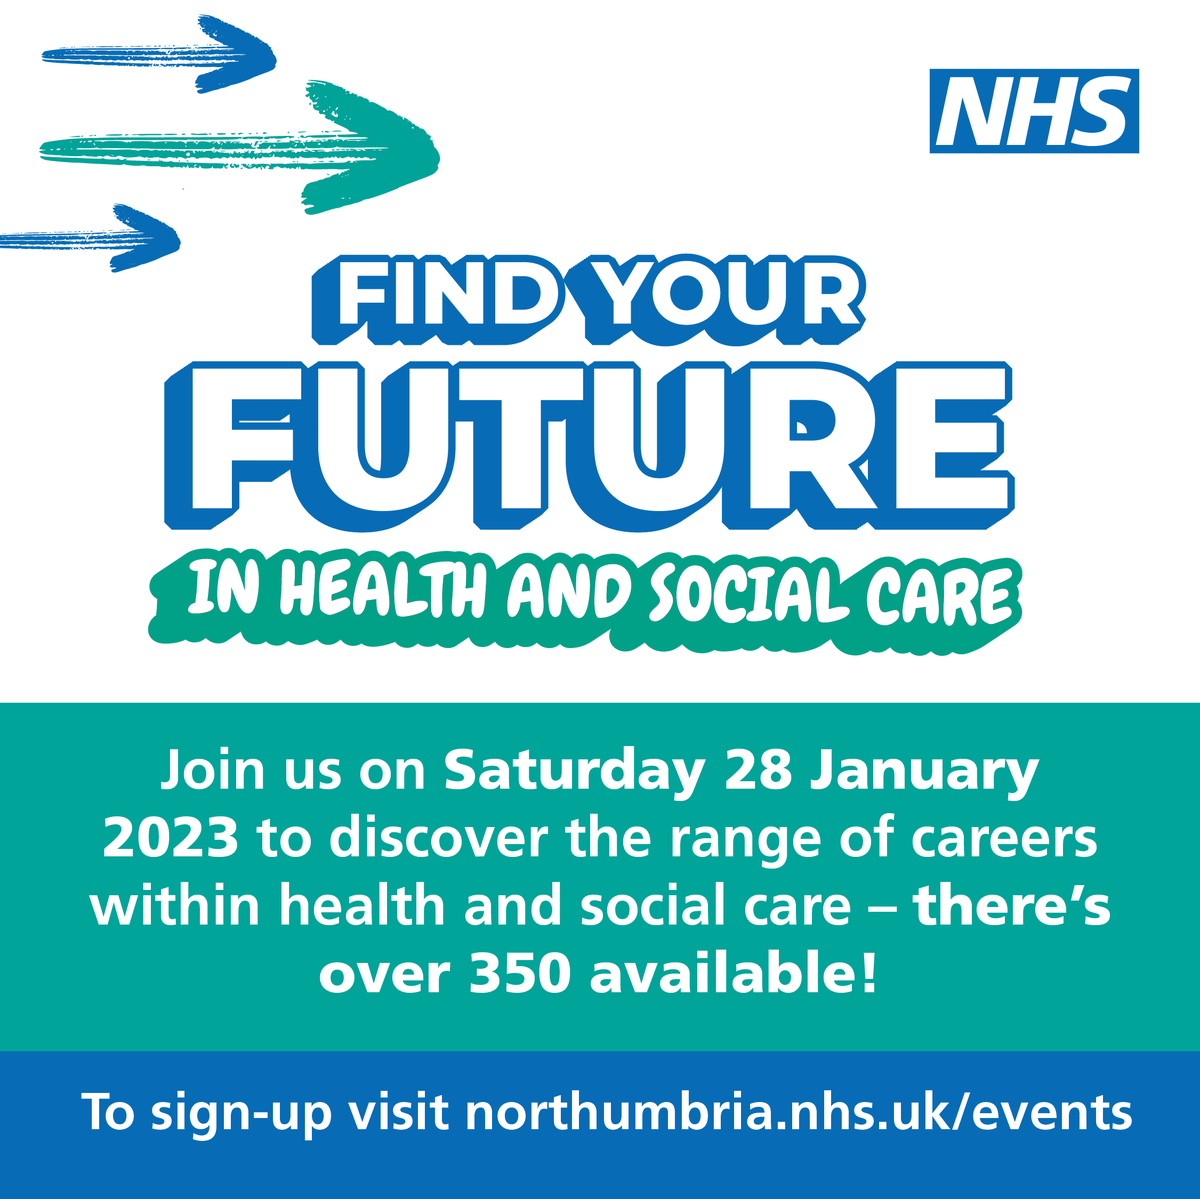 Join us on Saturday 28 January 2023 at Northumbria Healthcare Manufacturing and Innovation Hub where you can discover the range of careers available within health and social care! 👩‍⚕️🩺📝 To find out more information and to register please visit👉northumbria.nhs.uk/events